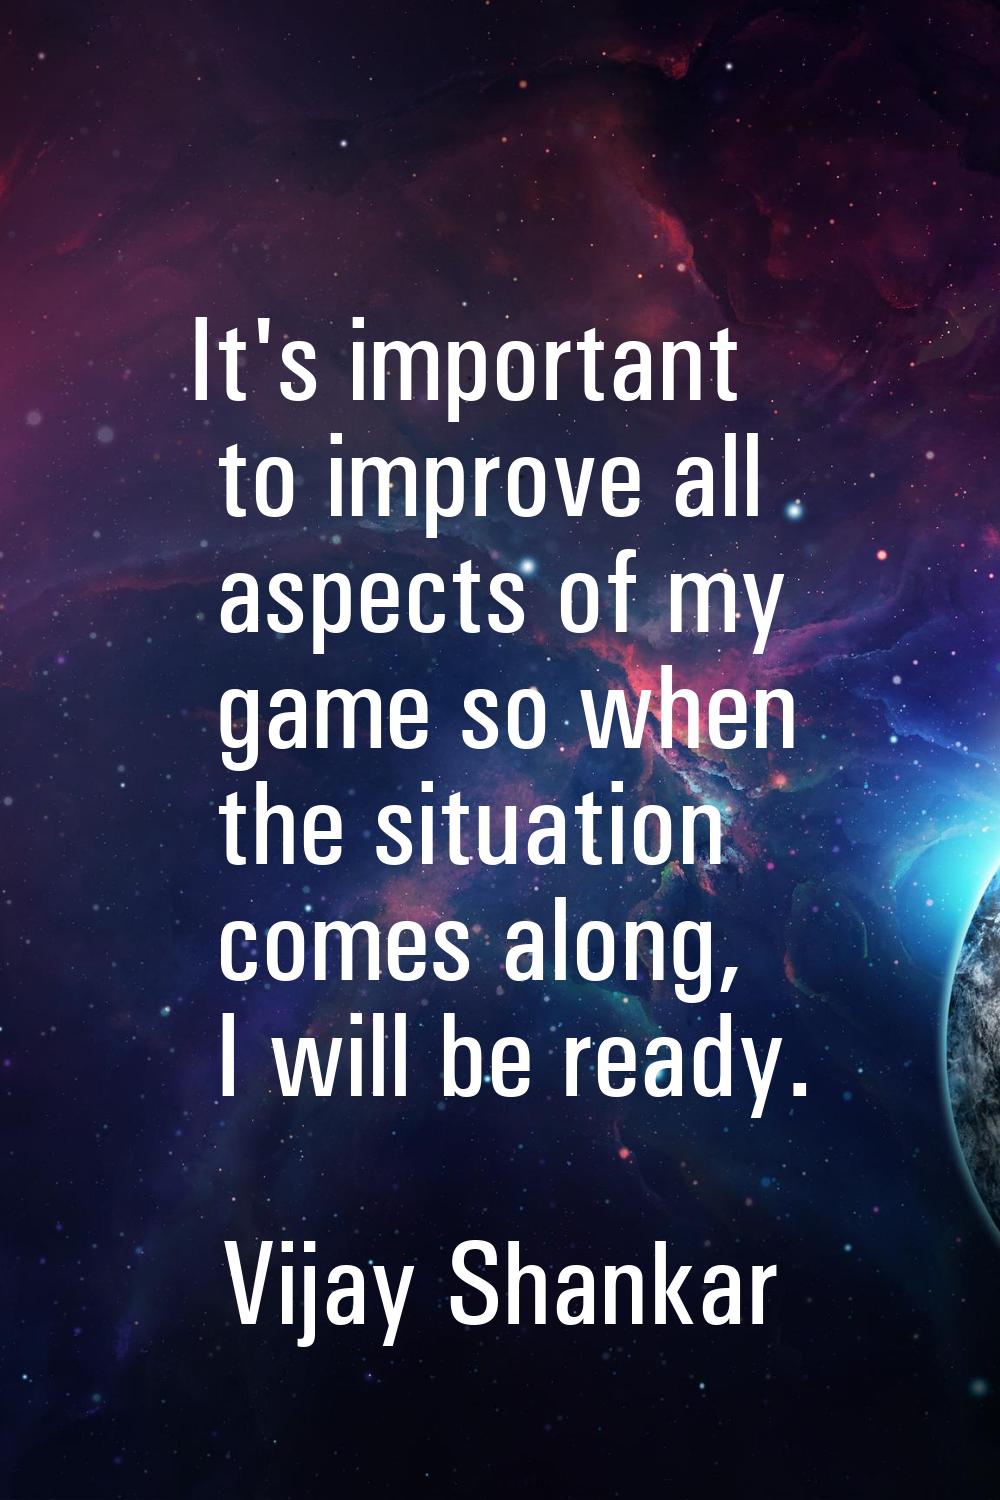 It's important to improve all aspects of my game so when the situation comes along, I will be ready